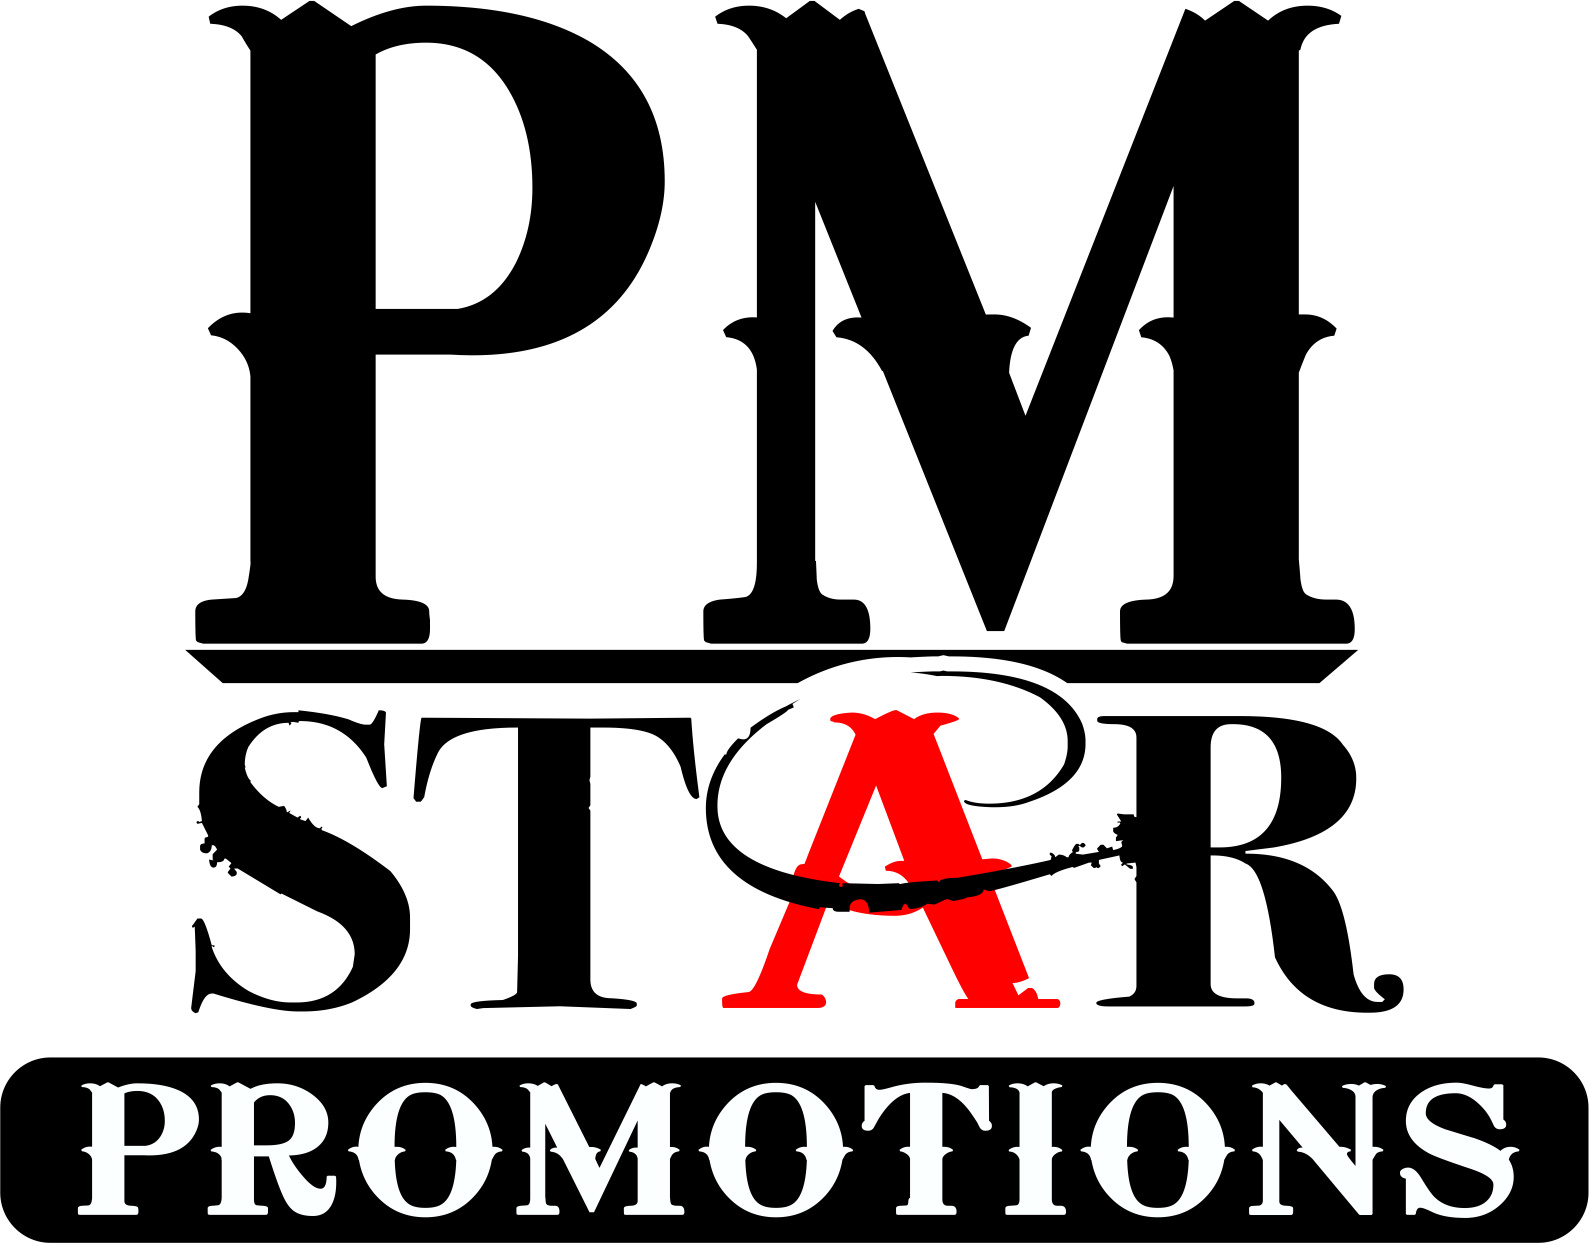 PM STAR PROMOTIONS